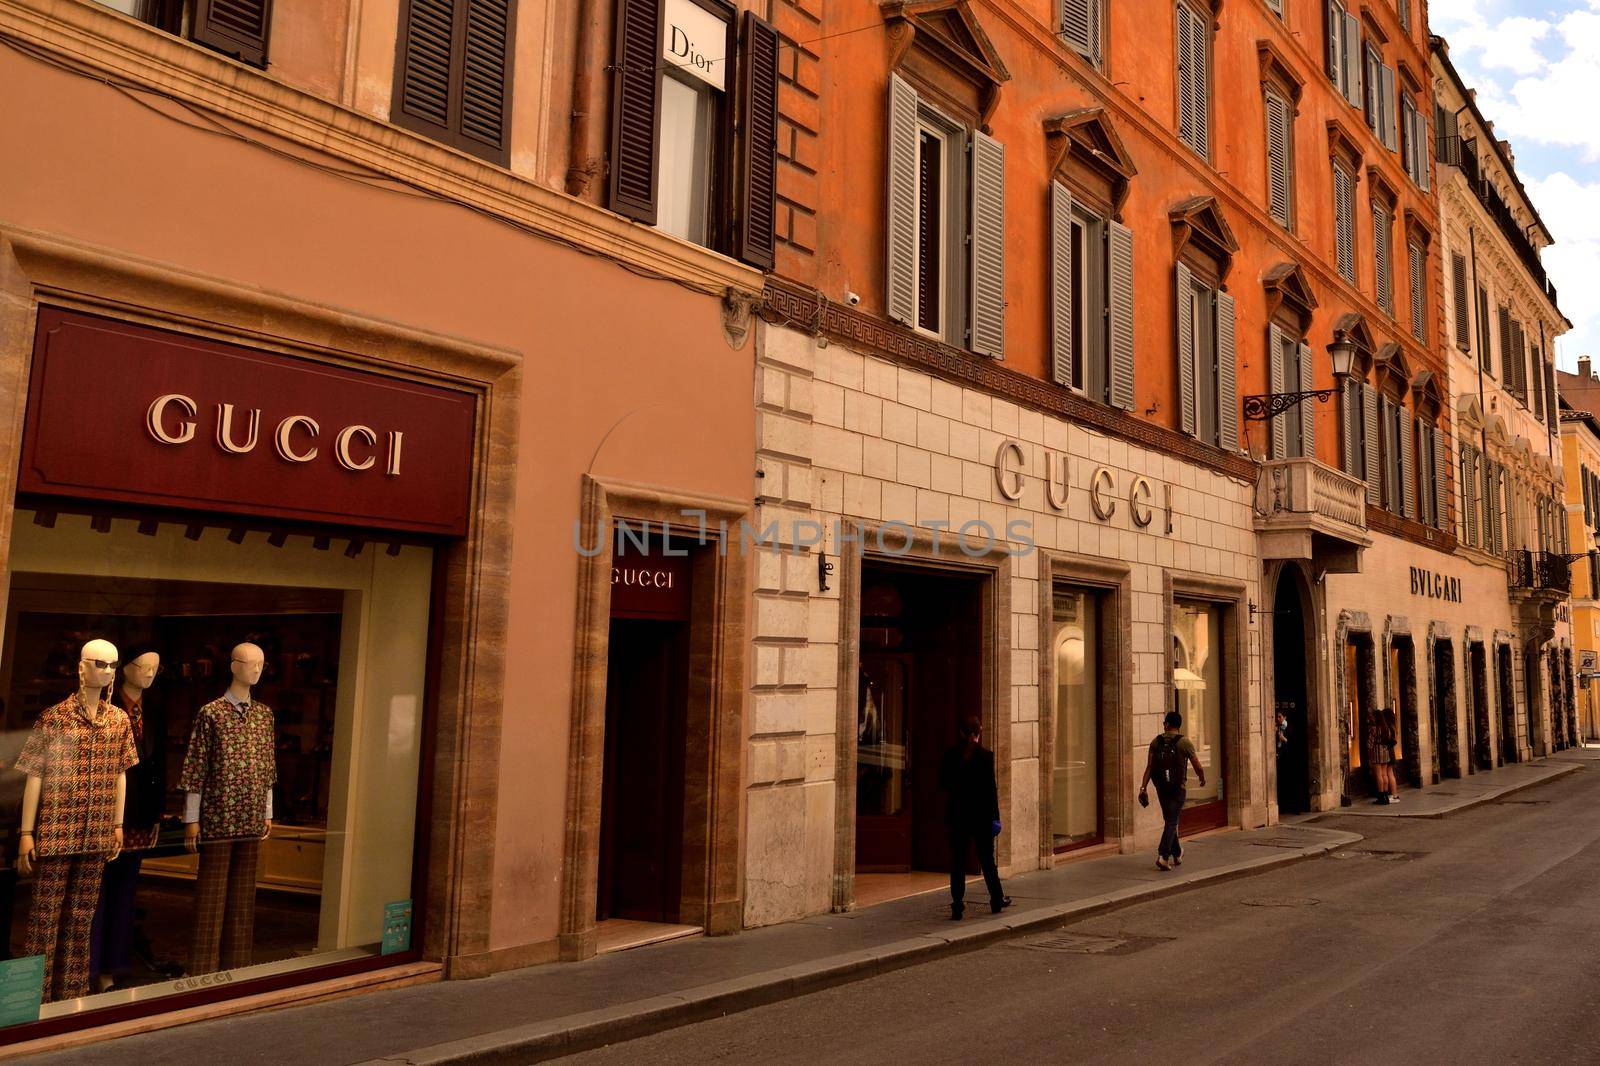 View of the Gucci store in Via dei Condotti without tourists due to the phase 2 of lockdown by silentstock639